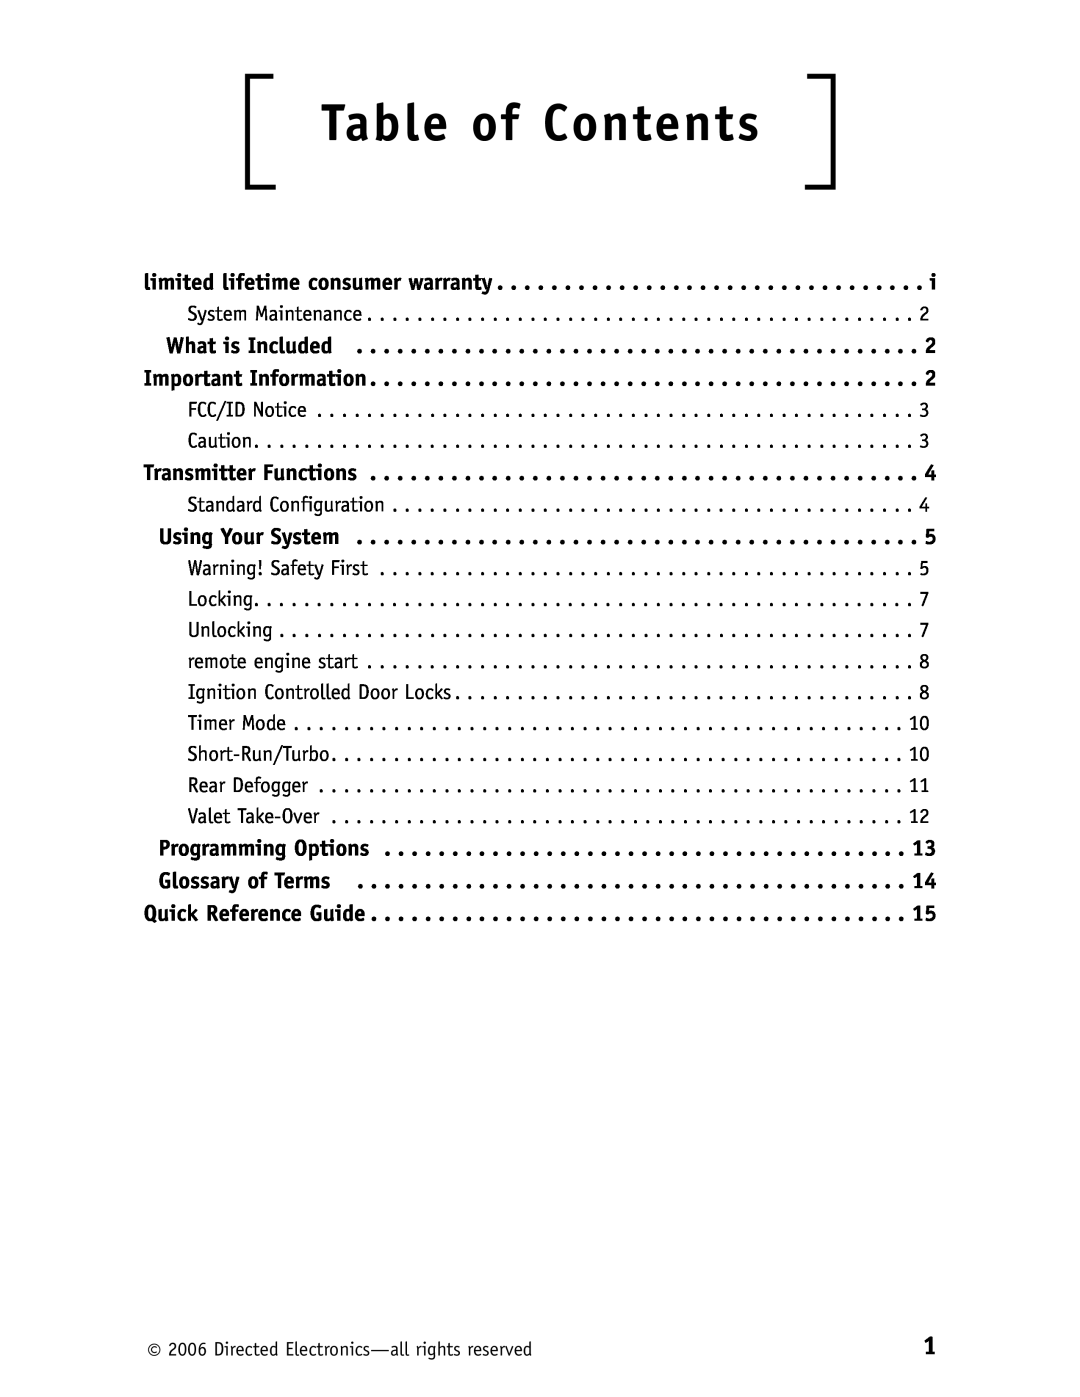 Clarion RS10 manual Table of Contents 